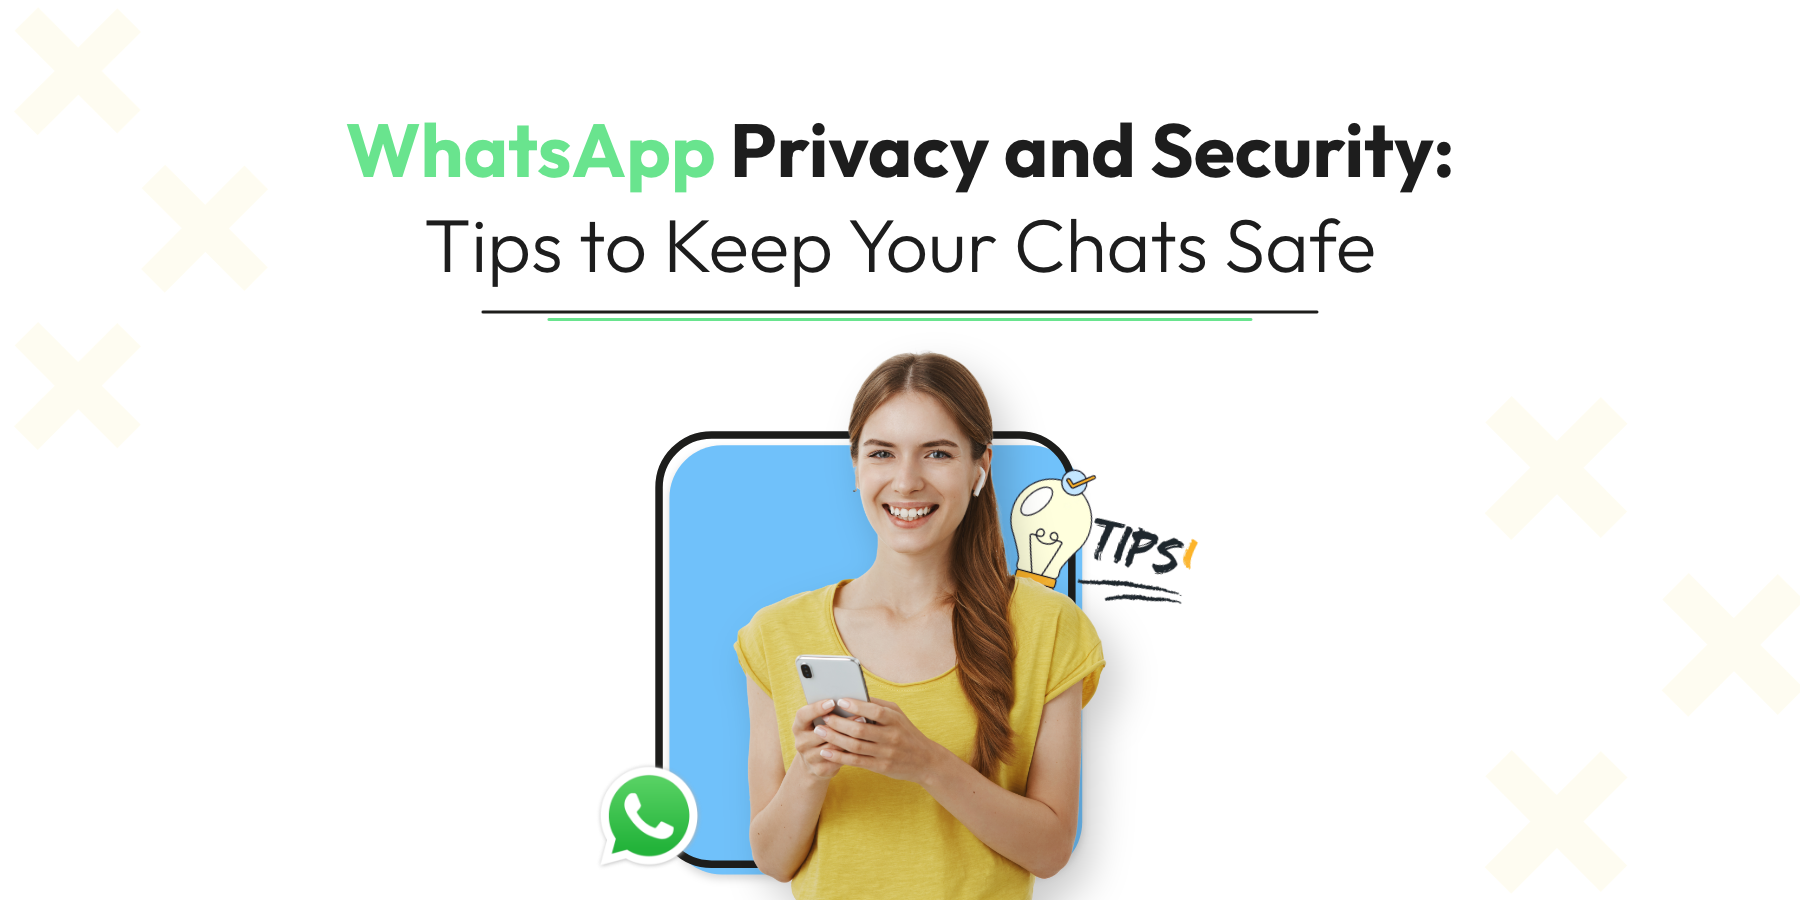 WhatsApp Privacy and Security: Tips to Keep Your Chats Safe